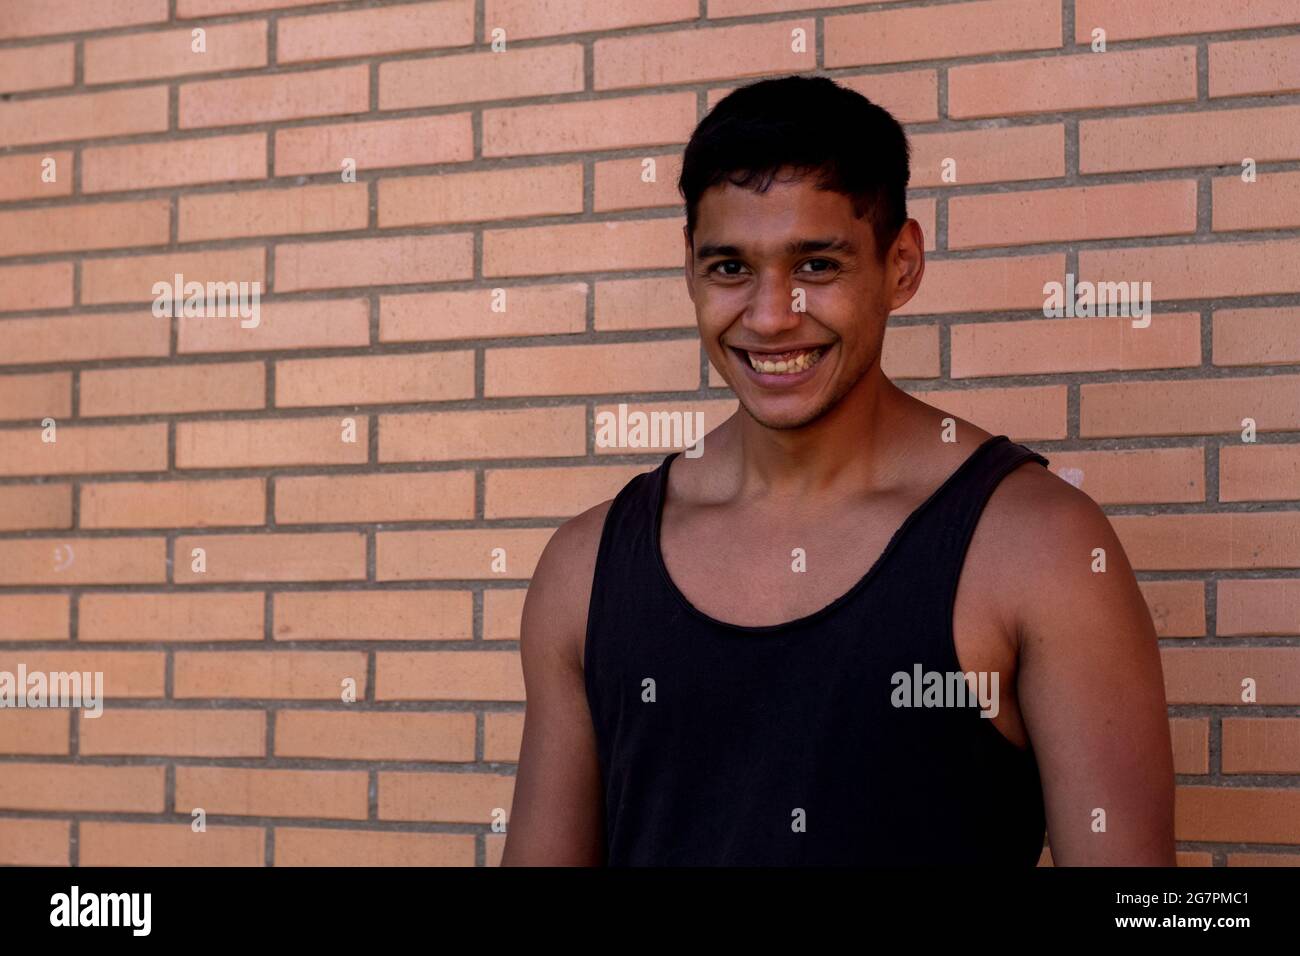 Portrait of a serious sportsman of Latino origin wearing a black tank top  on the wall background Stock Photo - Alamy